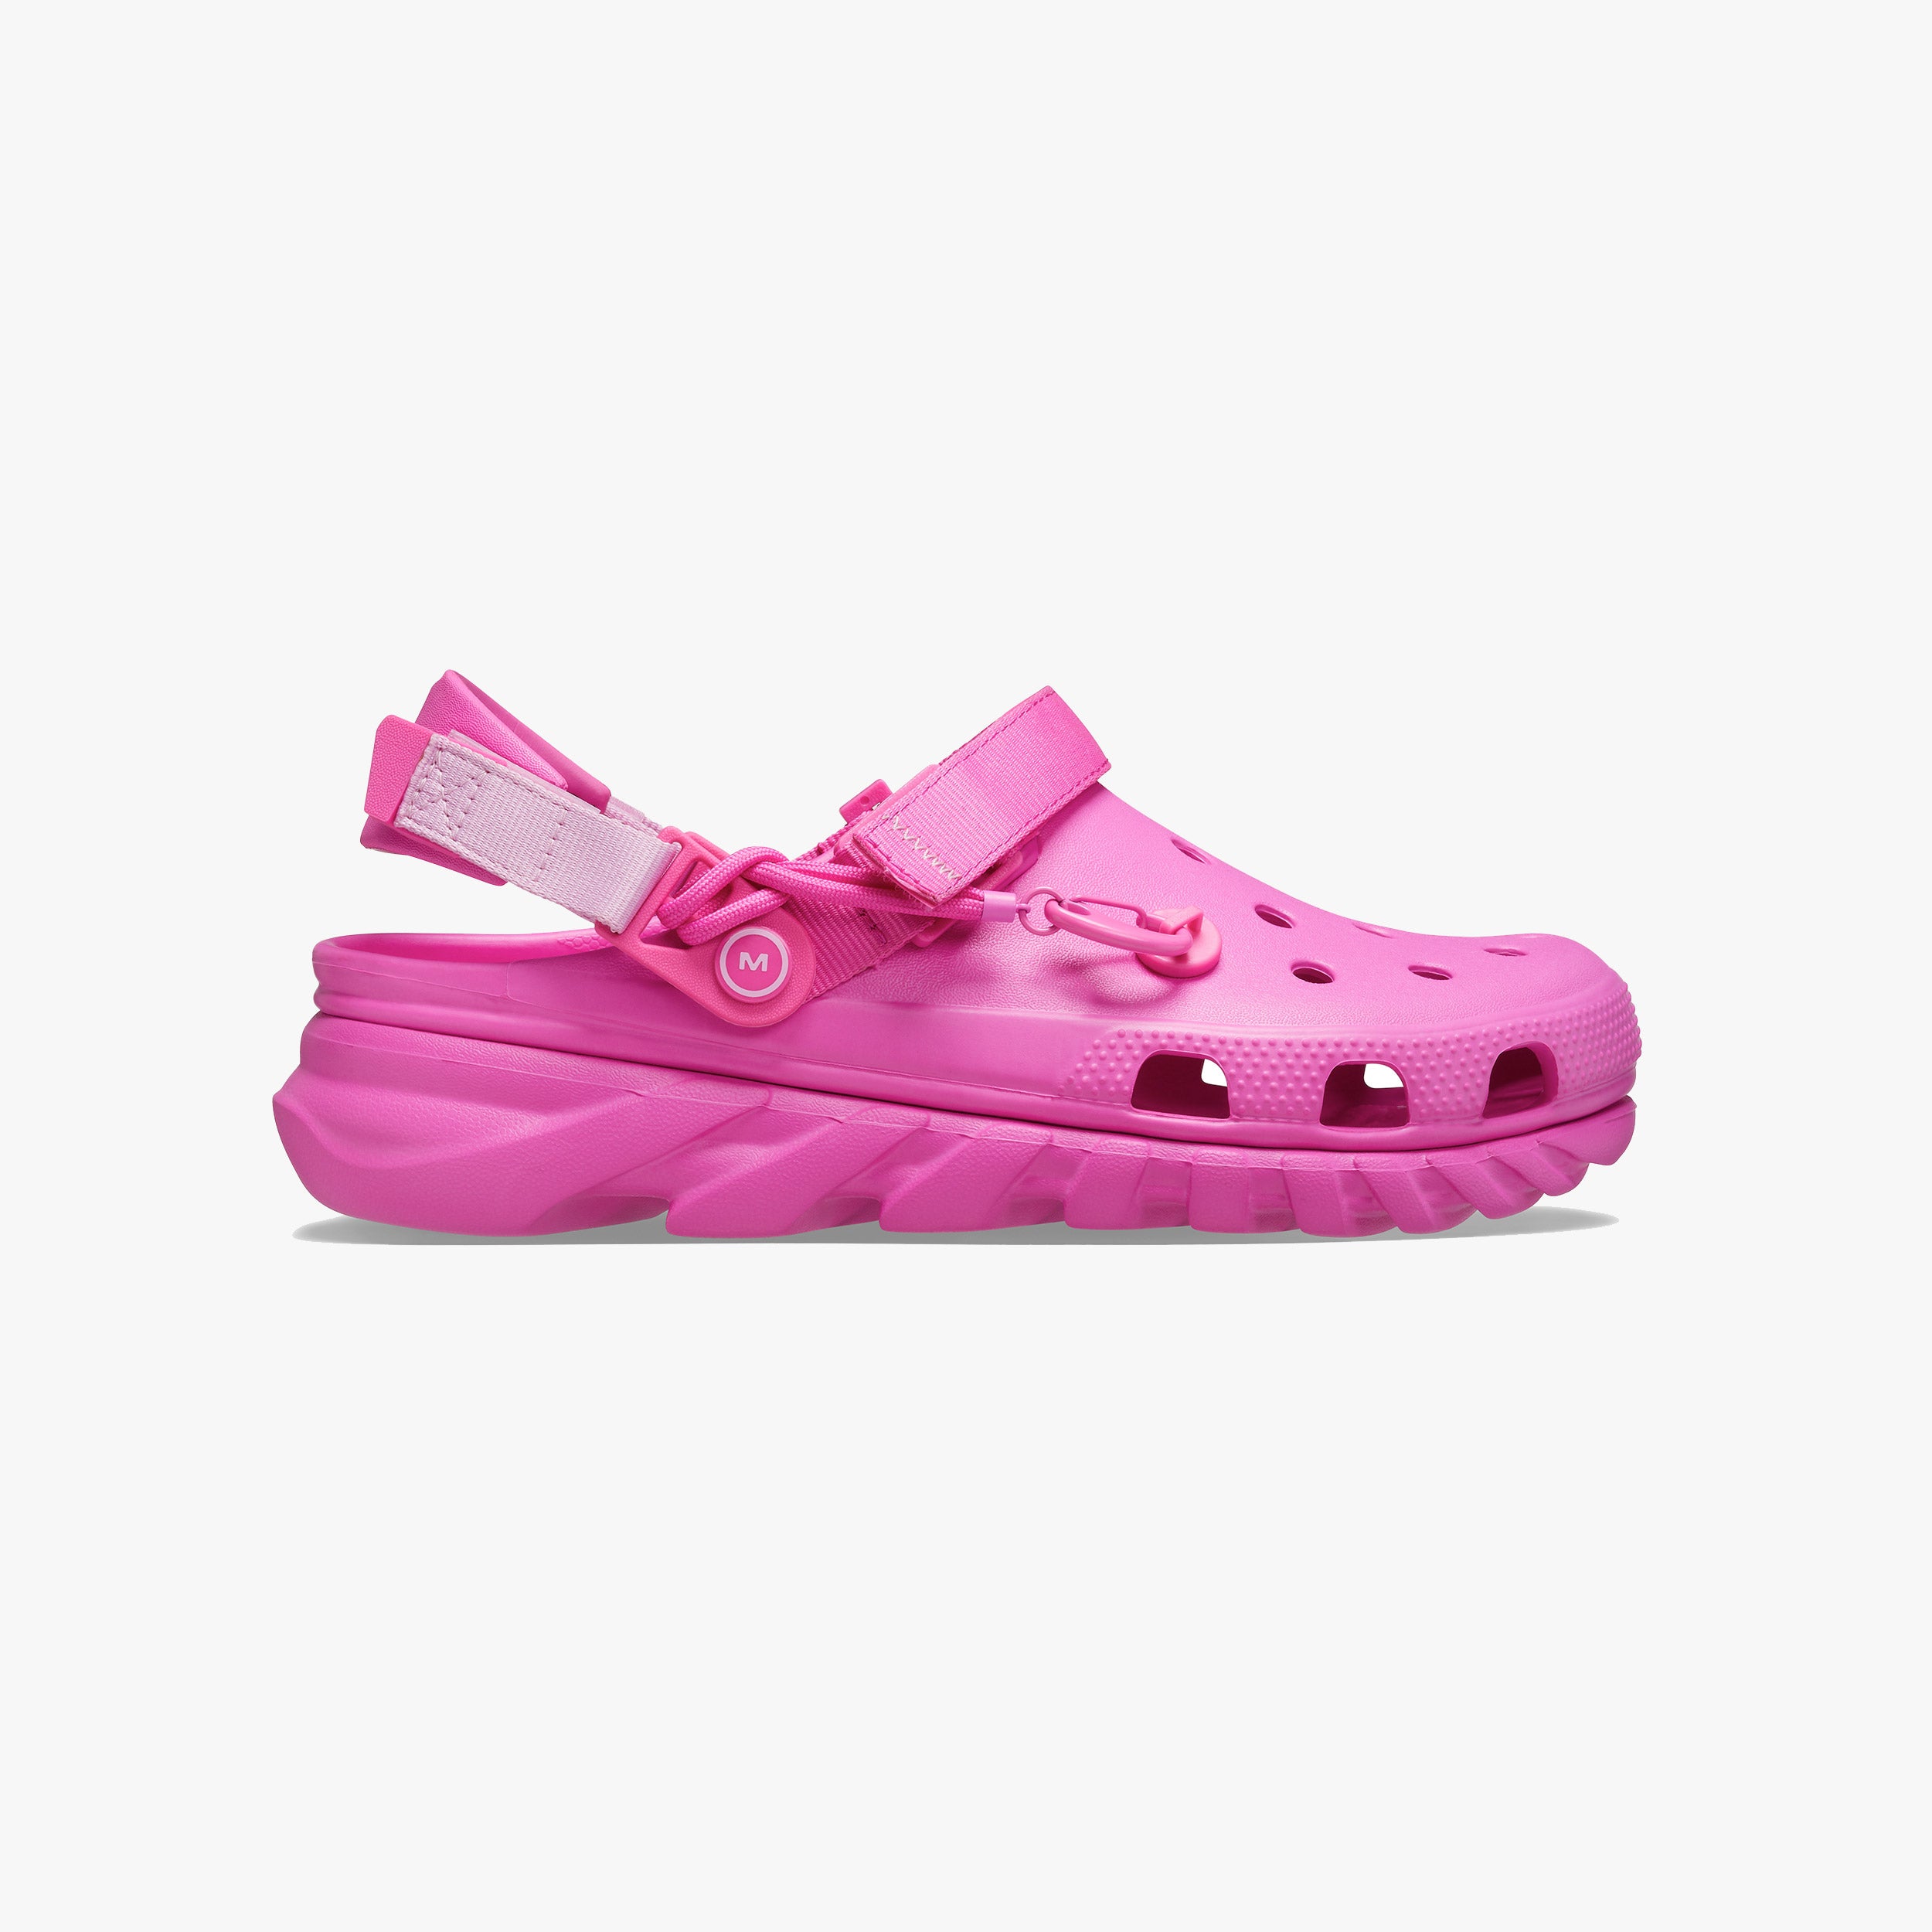 Rare Limited Edition Crocs Duet Max 2 Post Malone Pink